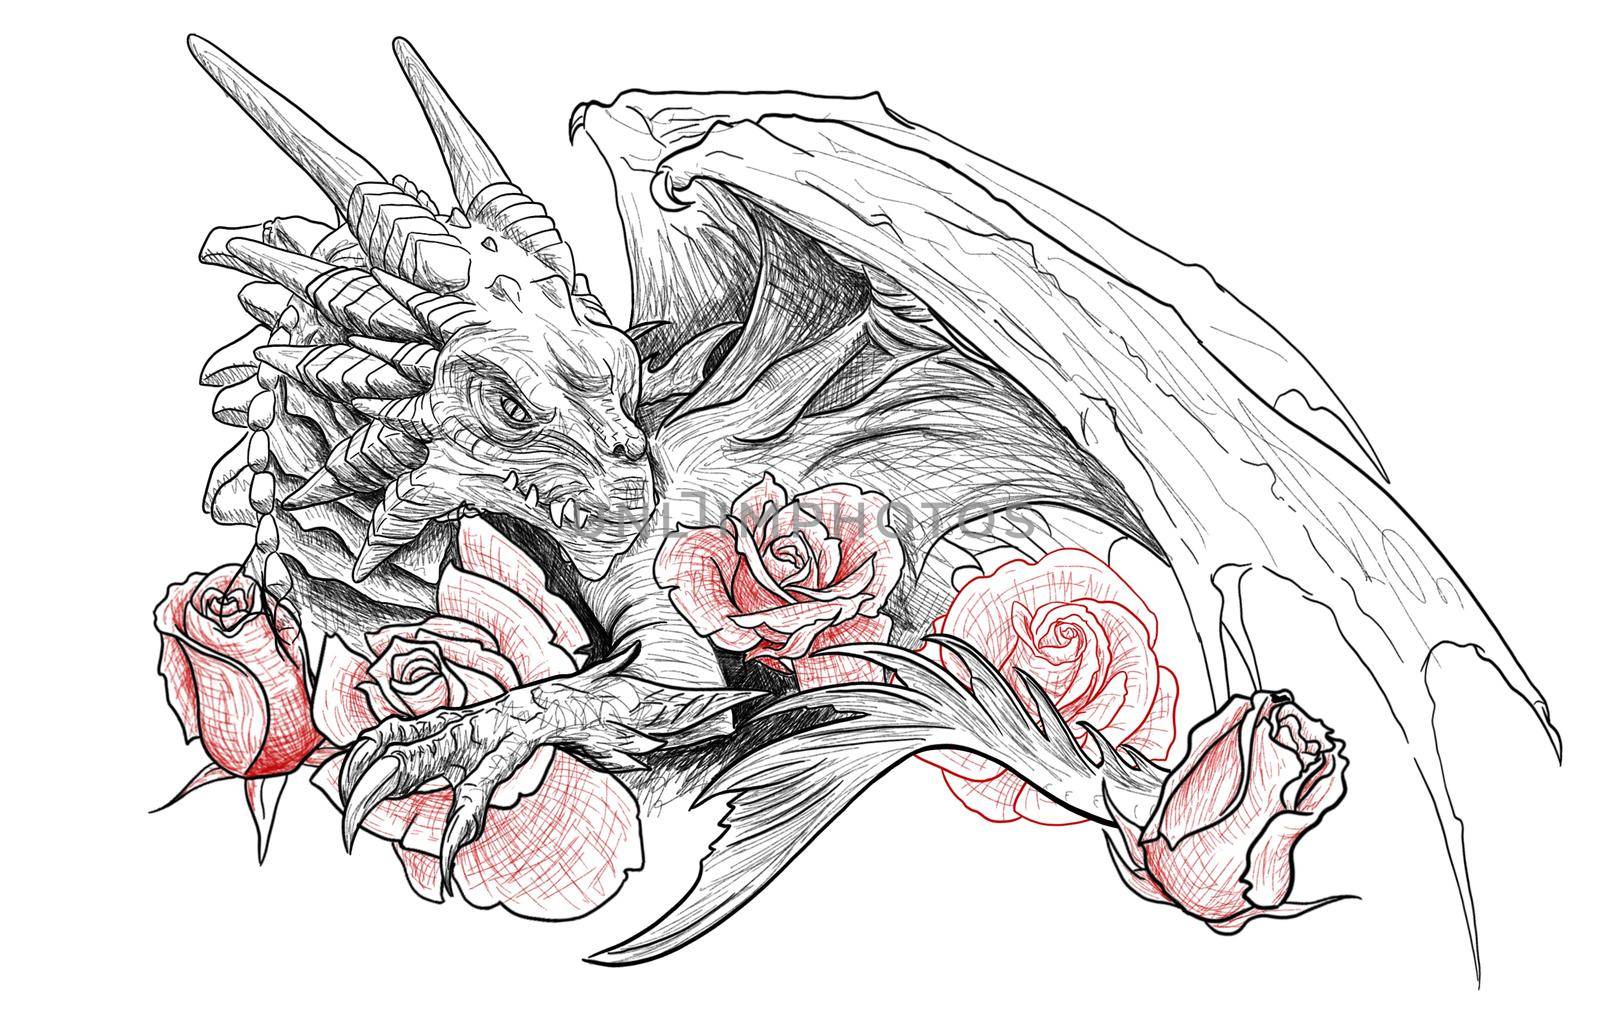 art dragon outline in graphic style with red flowers by kr0k0